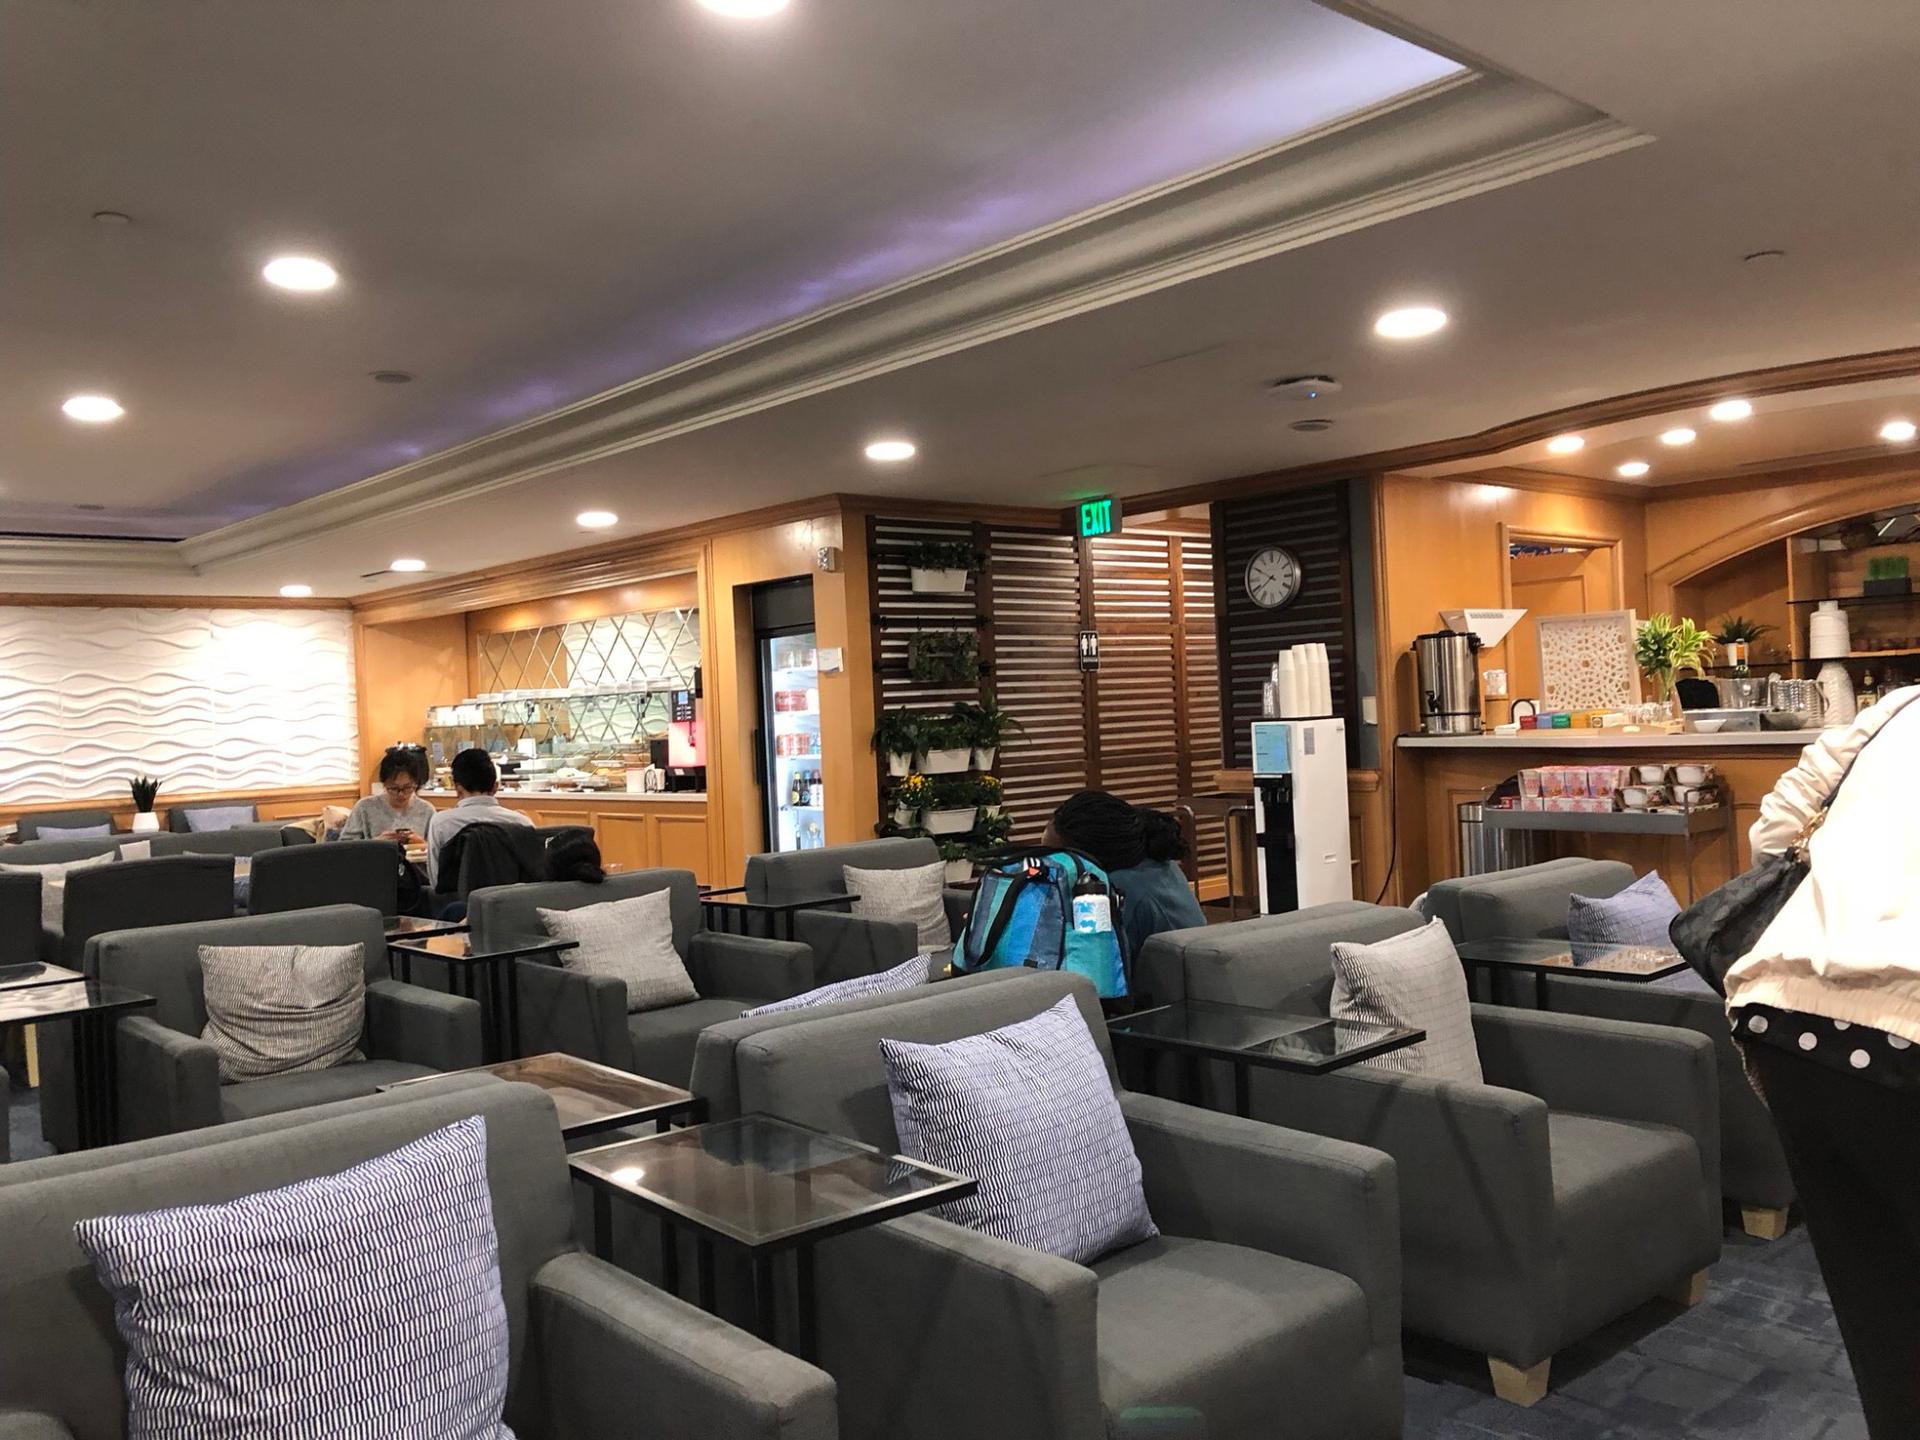 China Airlines Dynasty Lounge image 18 of 34